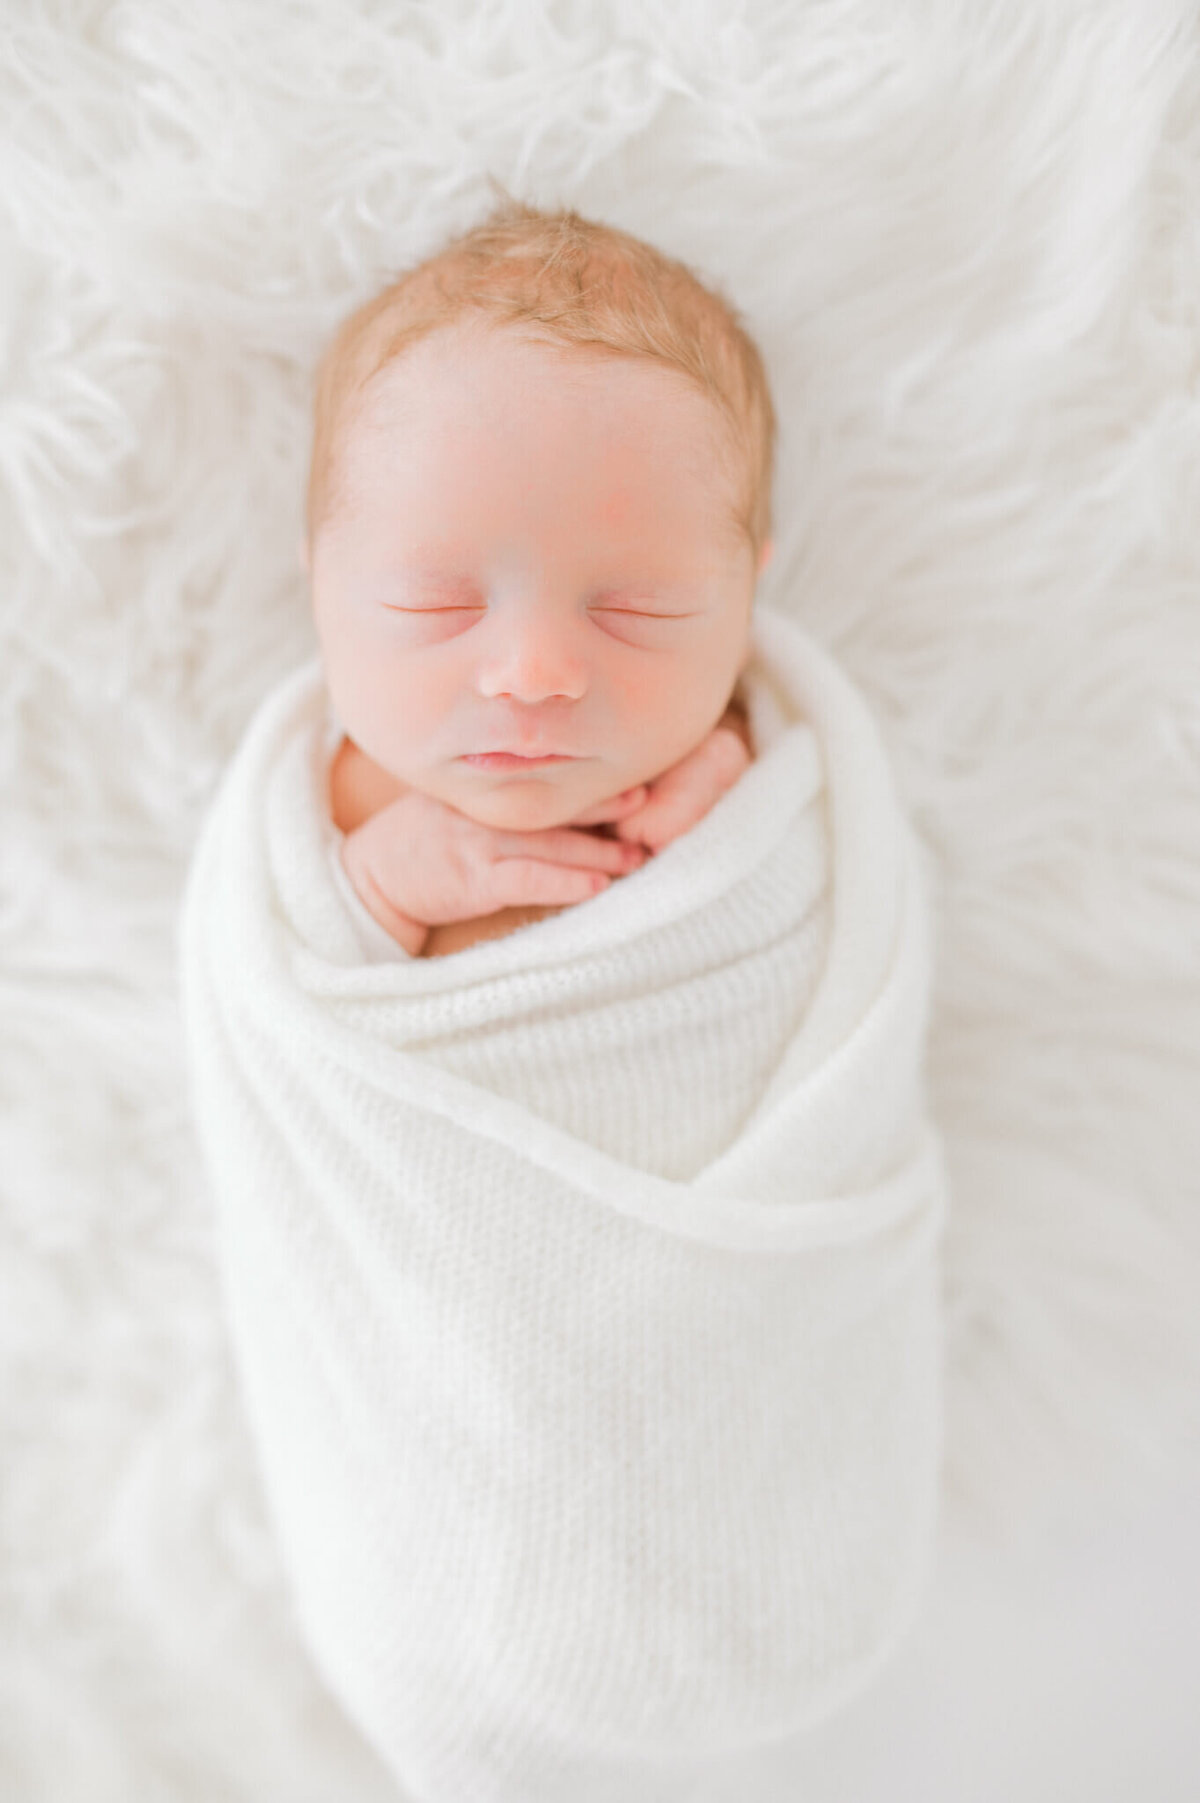 Newborn baby boy with strawberry blonde hair swaddled in wrap on white fur blanket